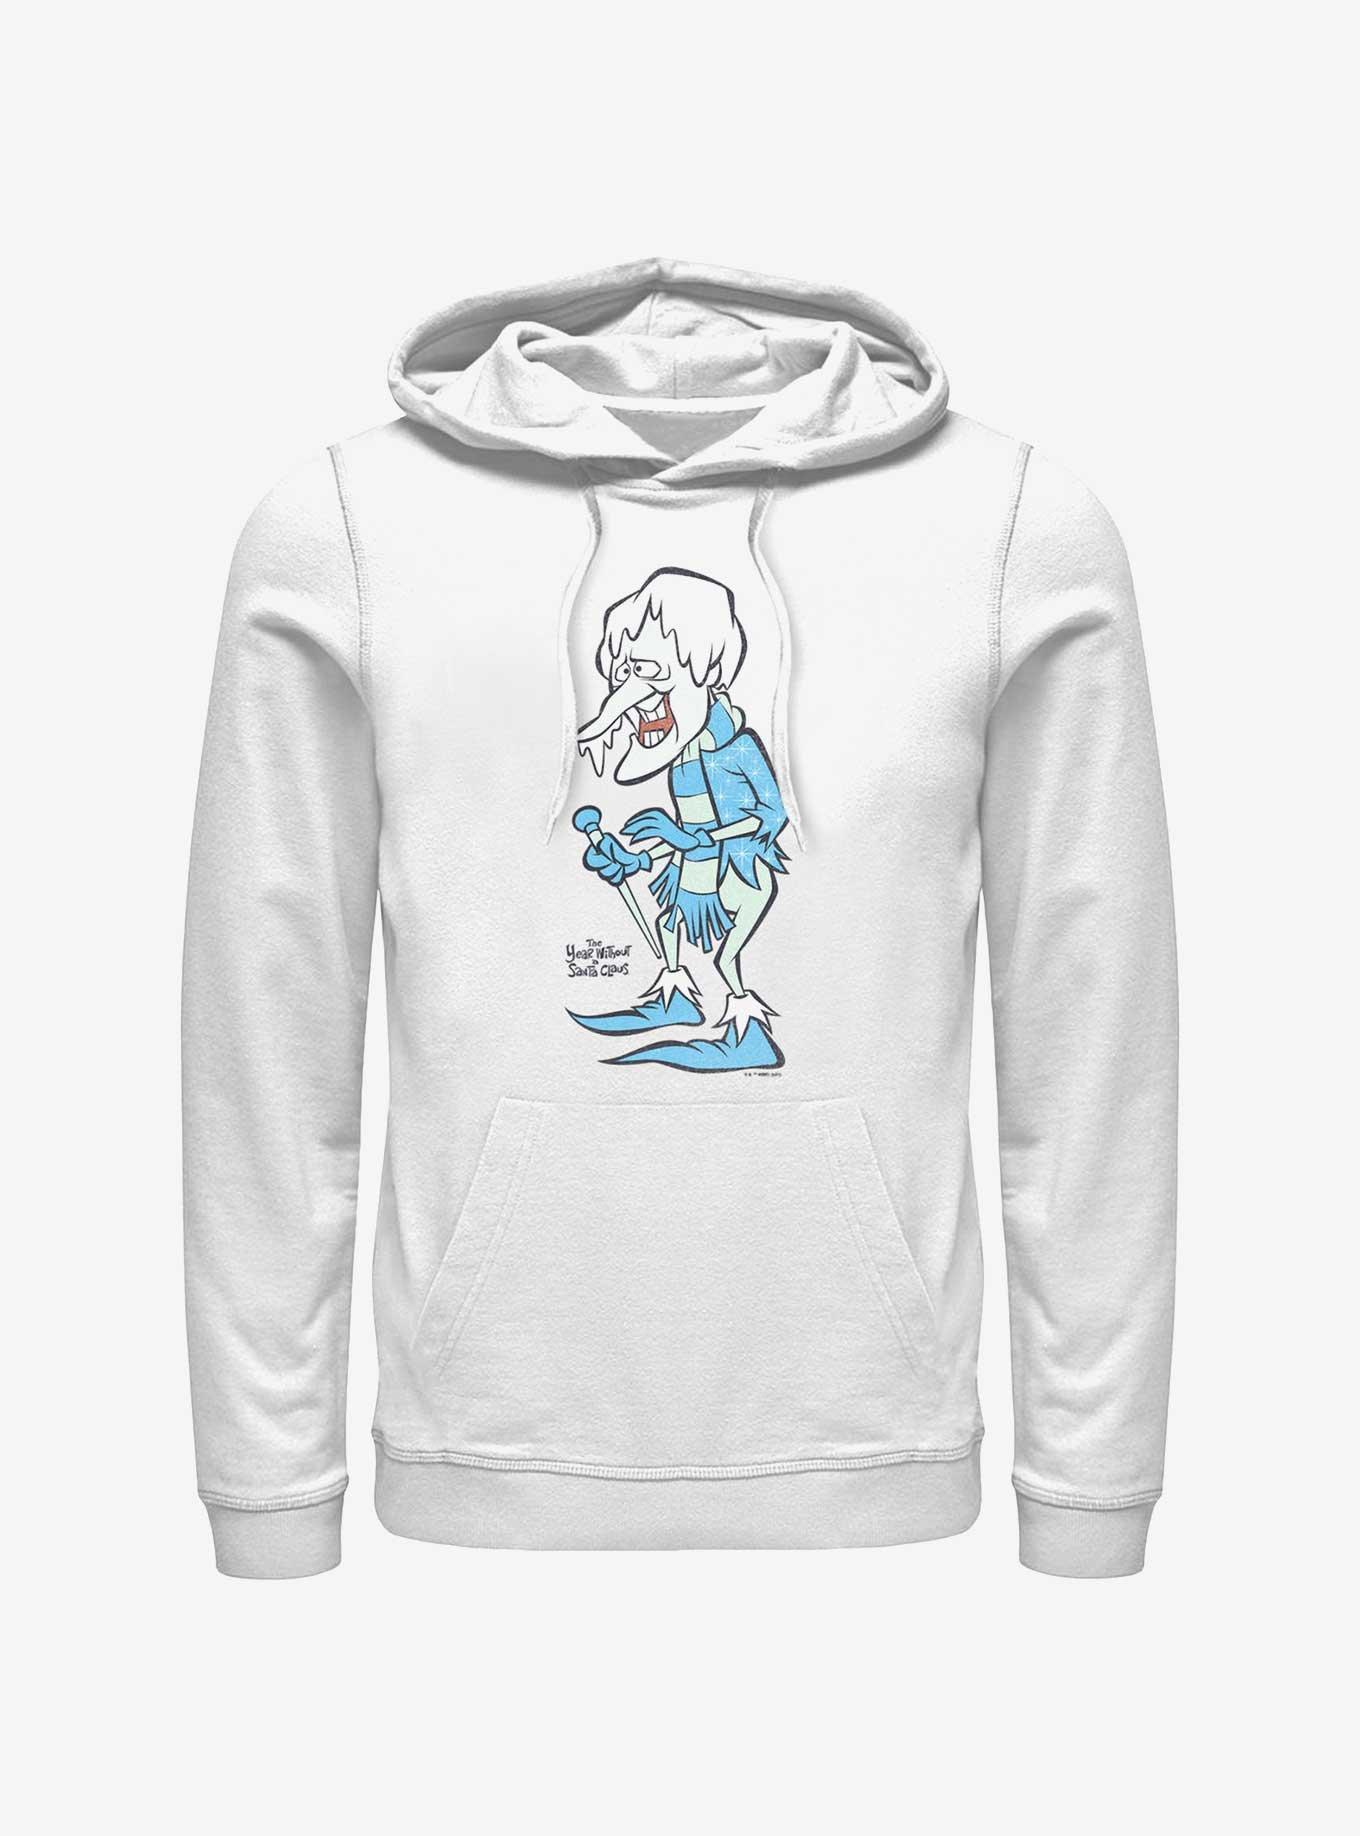 The Year Without a Santa Claus Snow Miser Hoodie